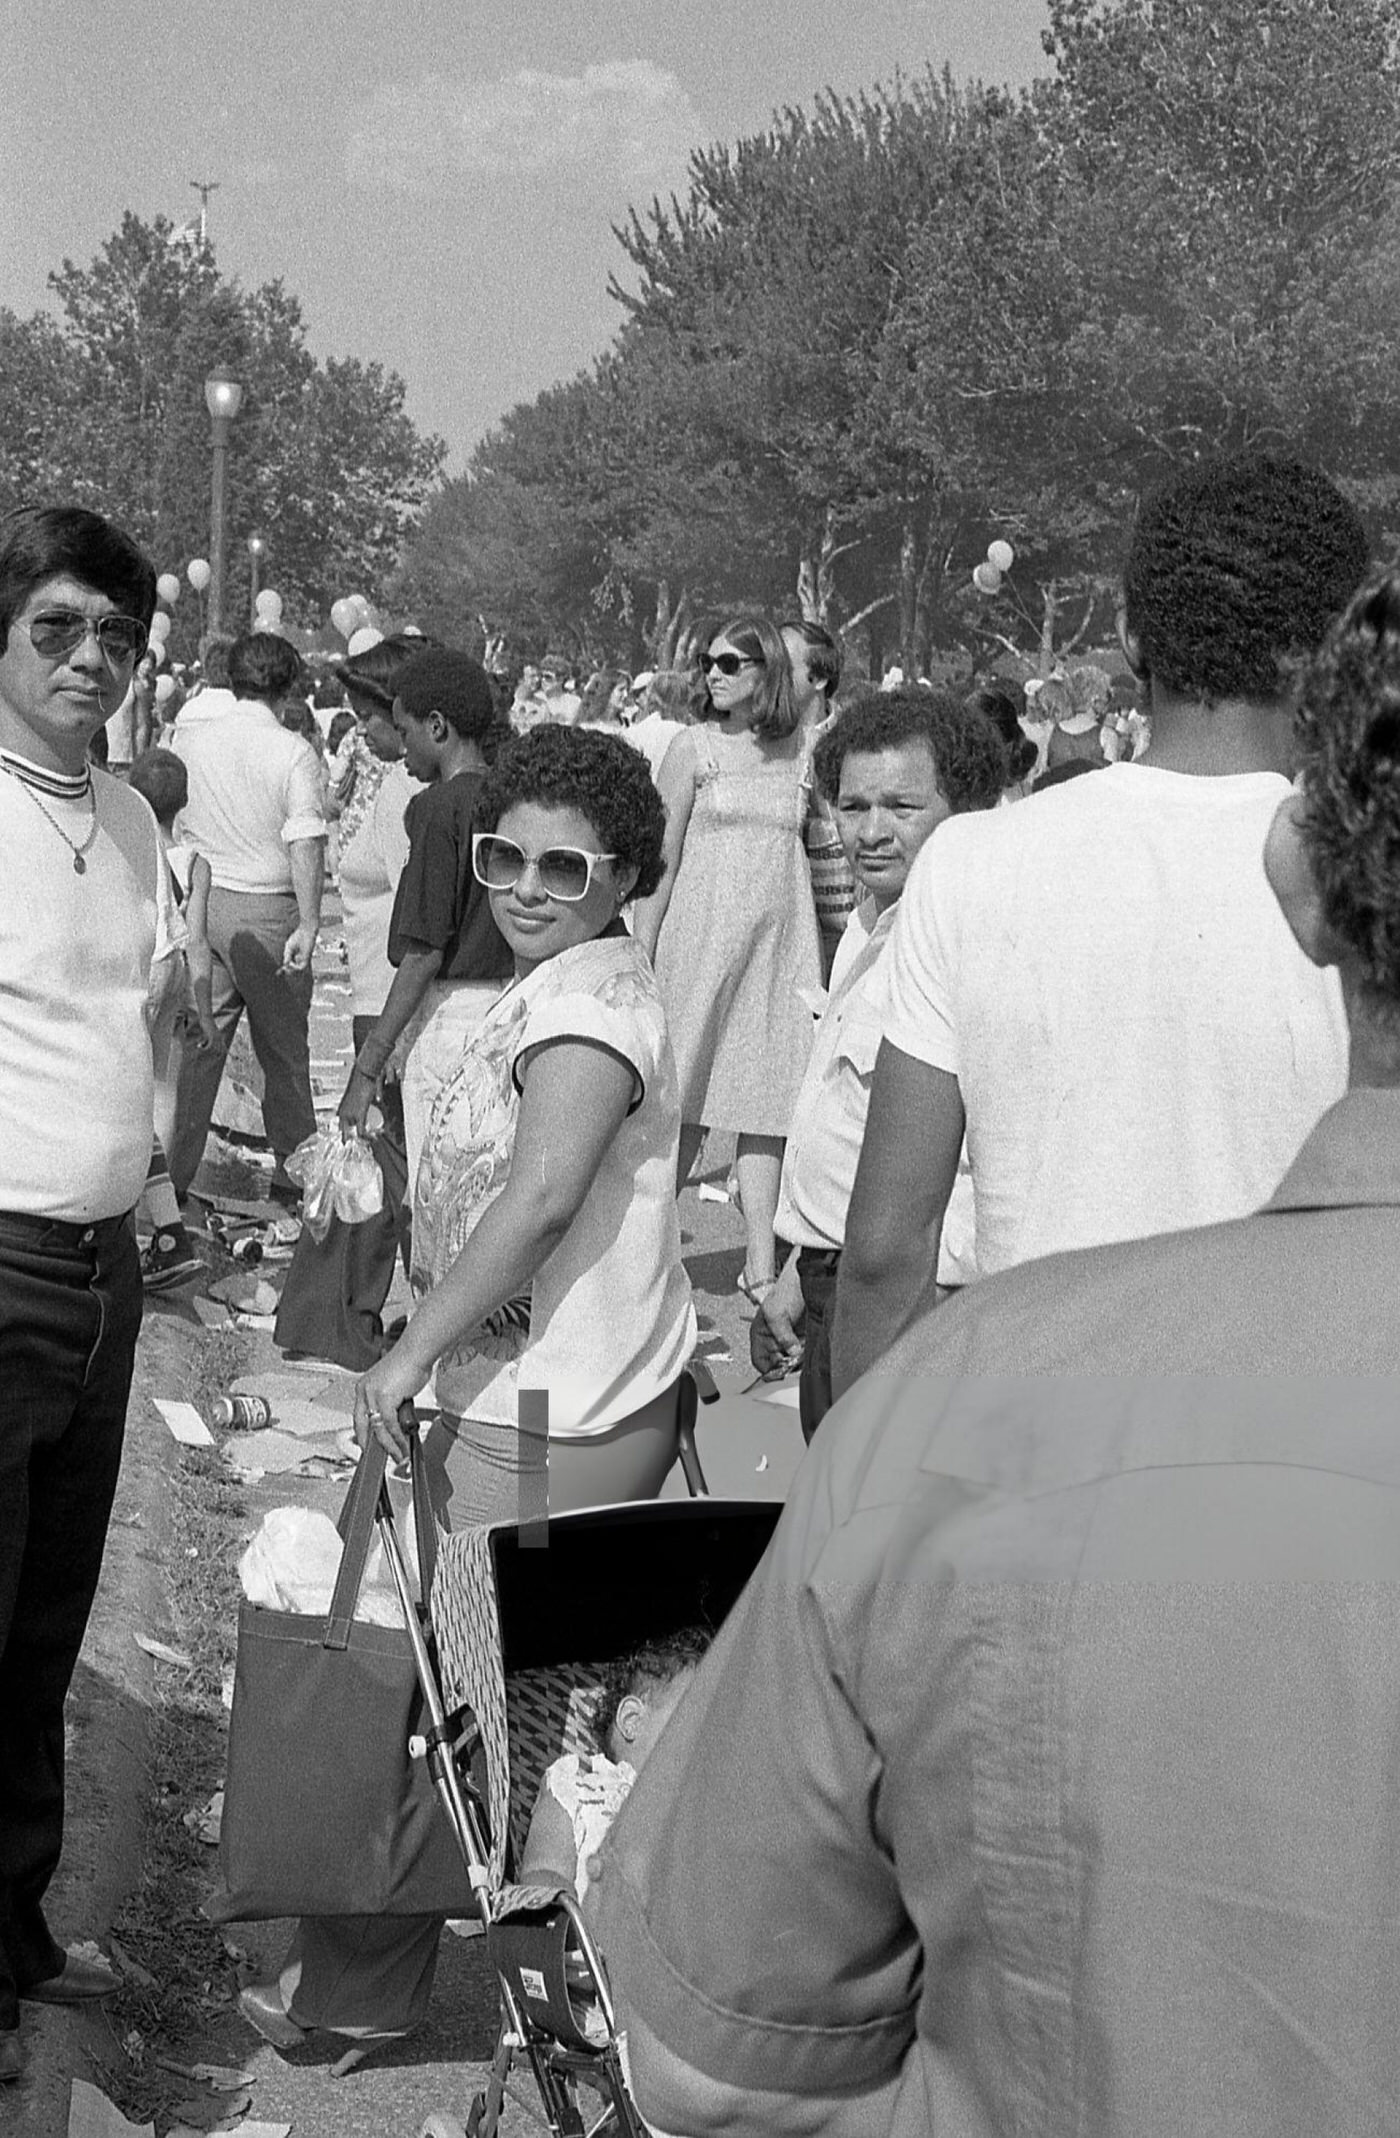 People Crowd On A Footpath In Flushing Meadows Park, Corona, Queens, 1980.